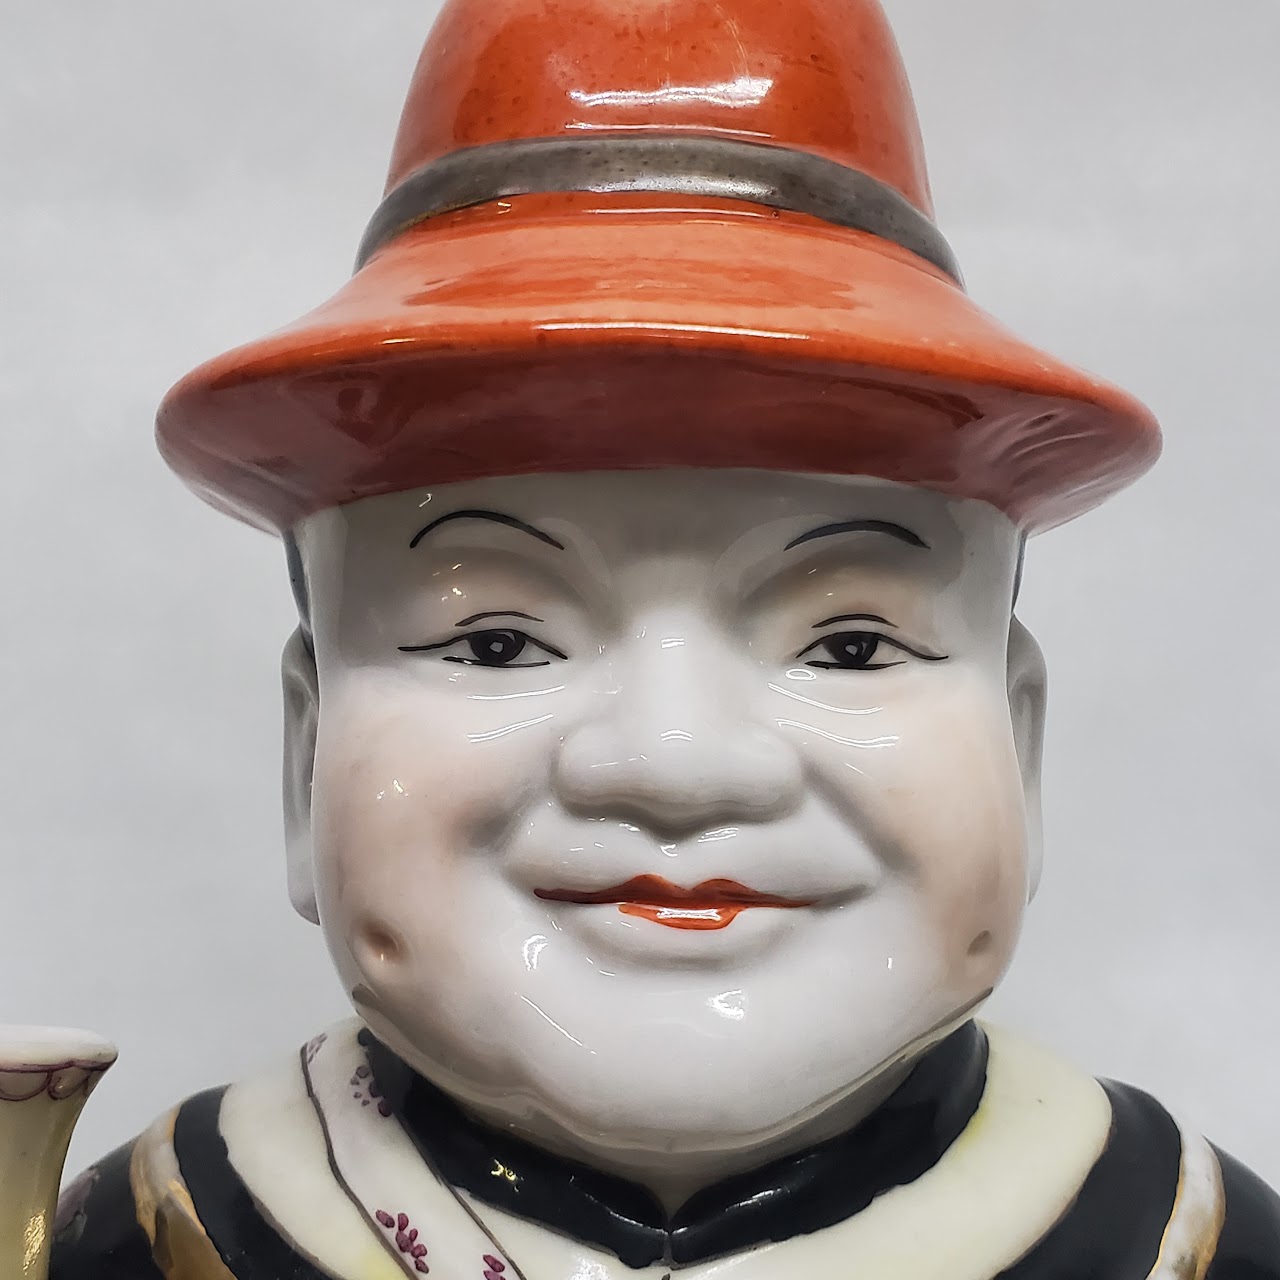 Chinese Porcelain Vessel Figurine